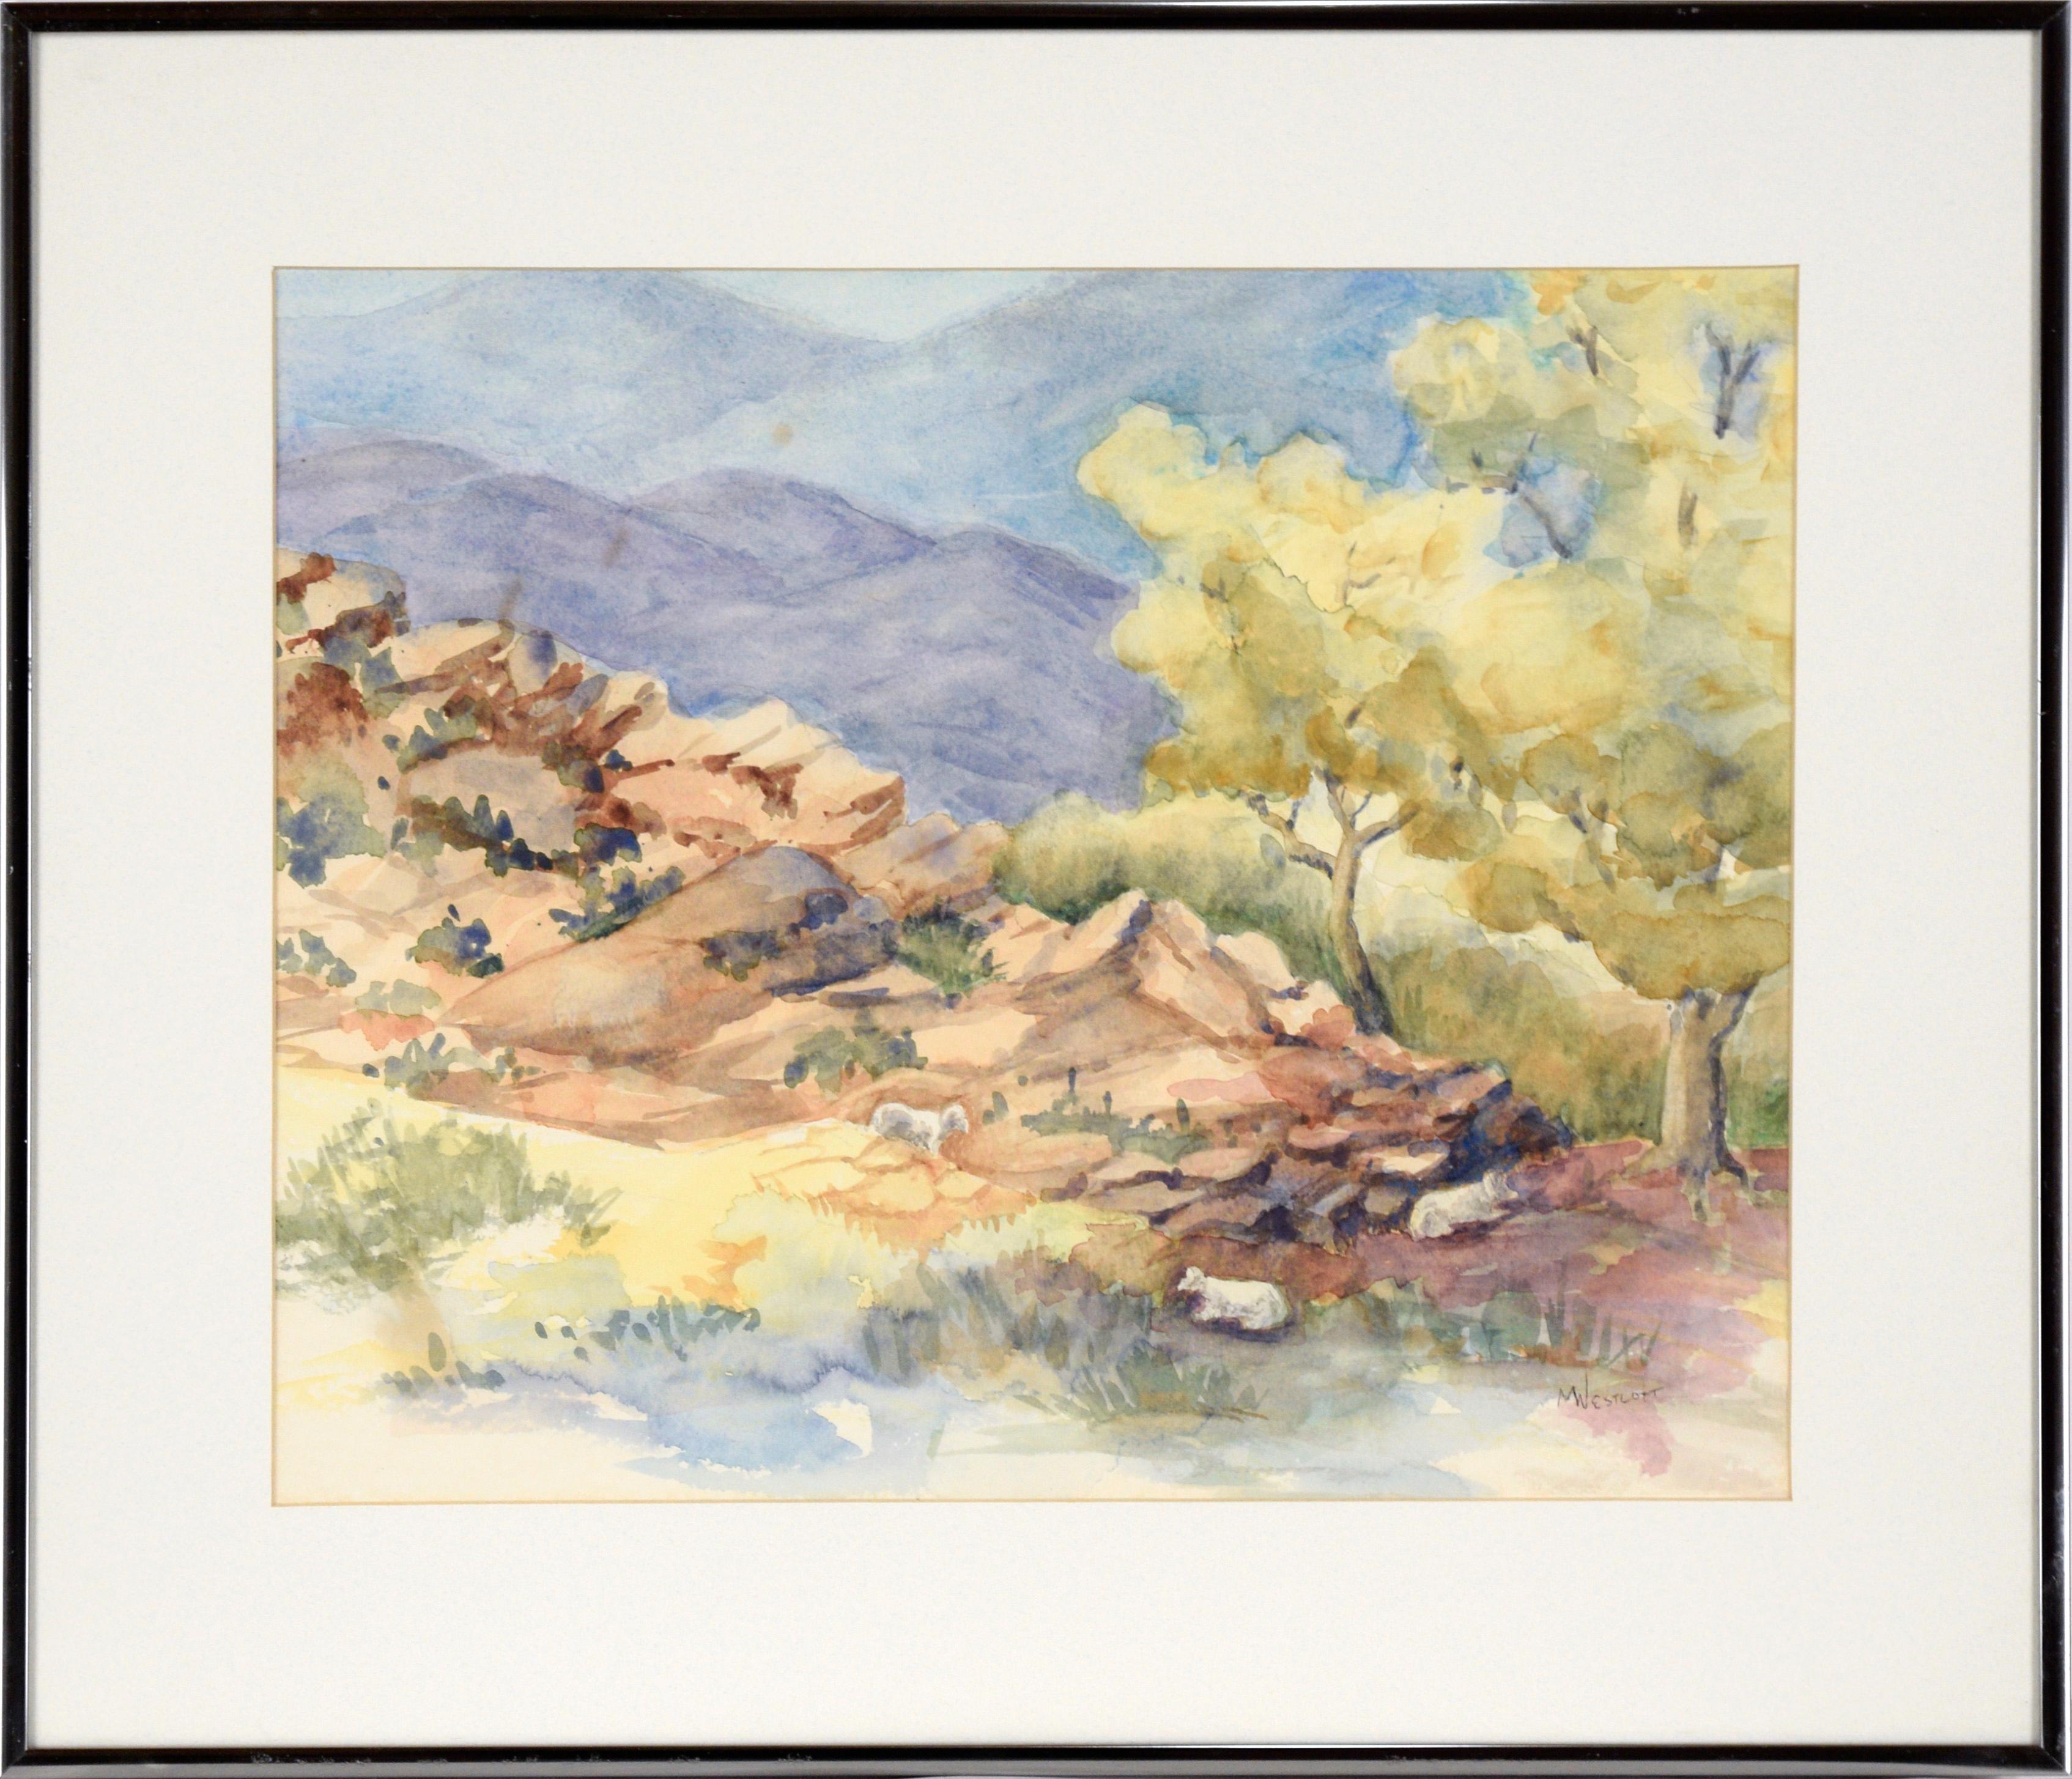 "Mountain Climbers" - Mountain Landscape in Watercolor on Paper